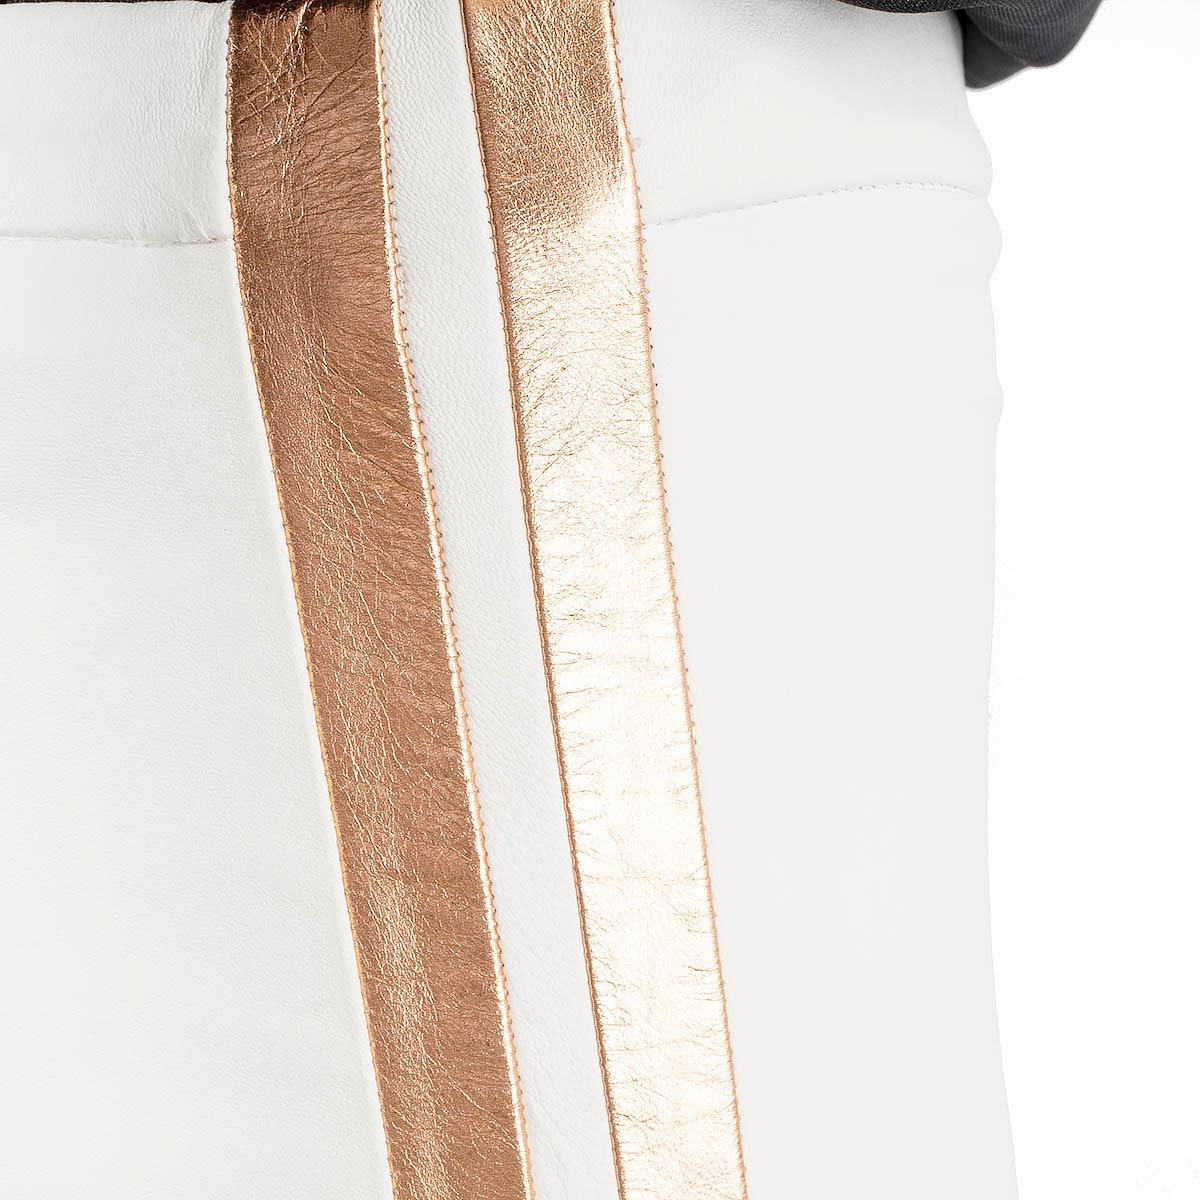 HAIDER ACKERMANN ivory SIDE STRIPE LEATHER LEGGINGS Pants S In Excellent Condition For Sale In Zürich, CH